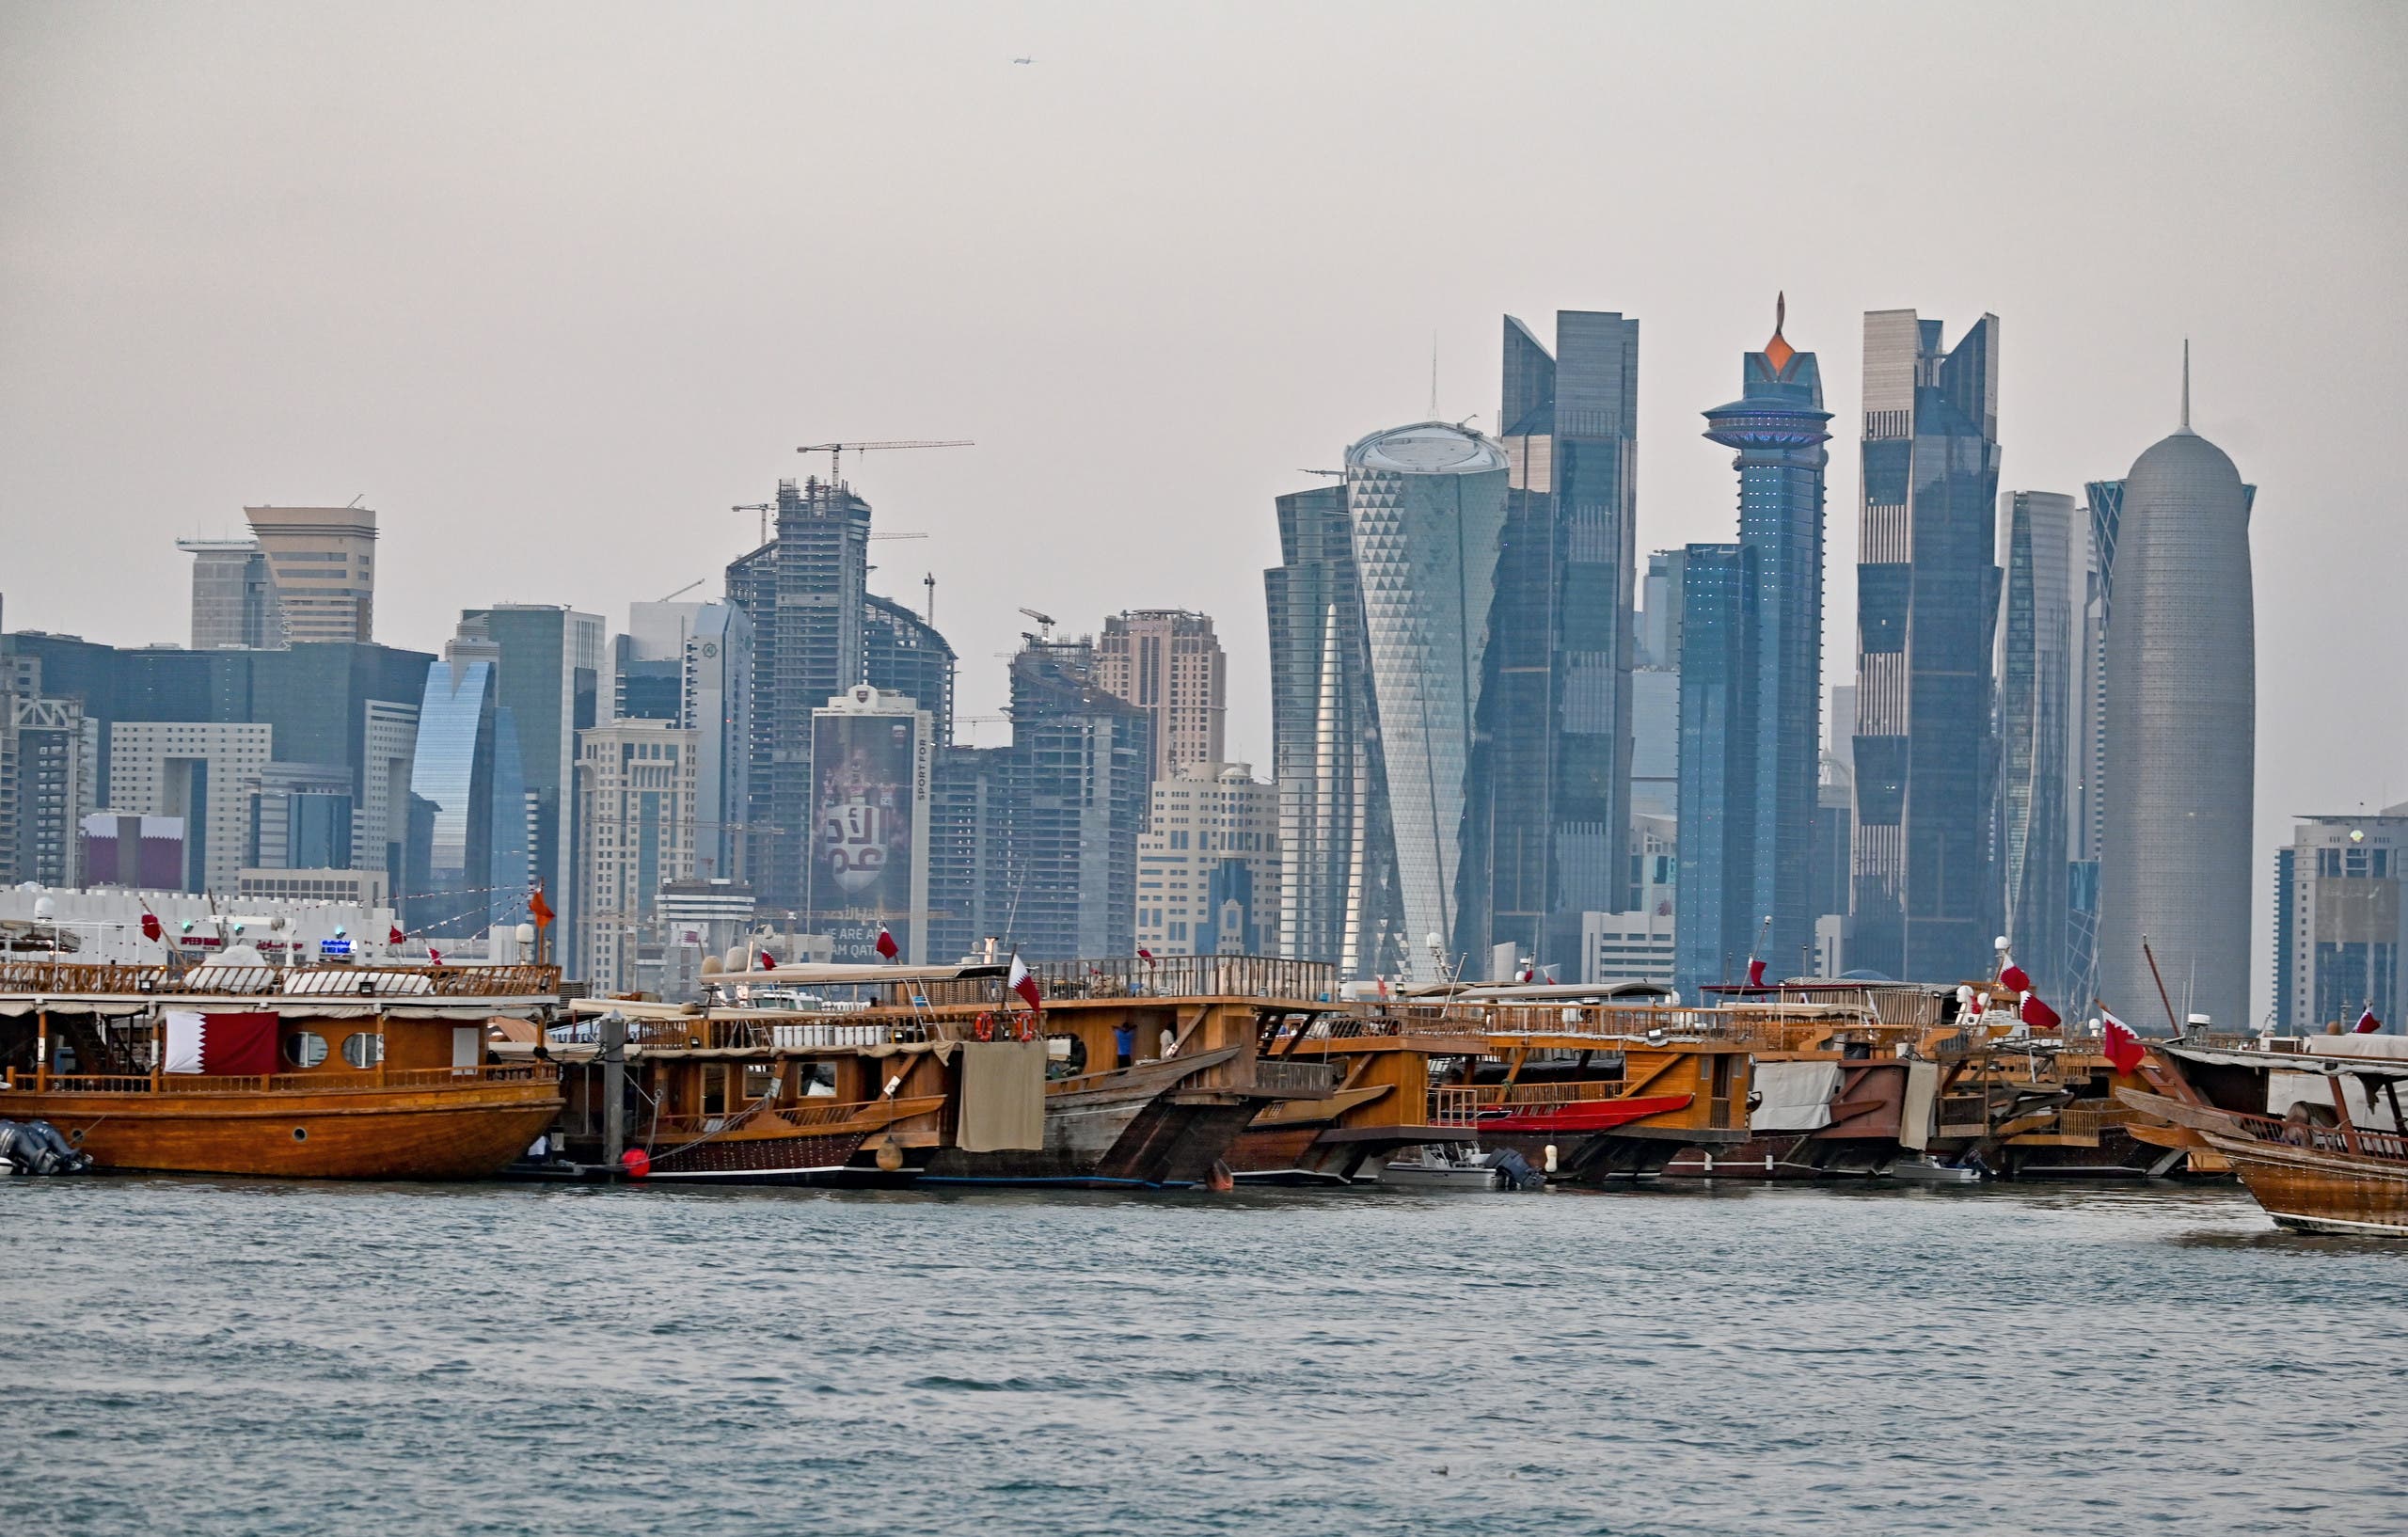 A general view taken on December 20, 2019 shows boats moored in front of the skyline of the Qatari capital, Doha. (AFP)